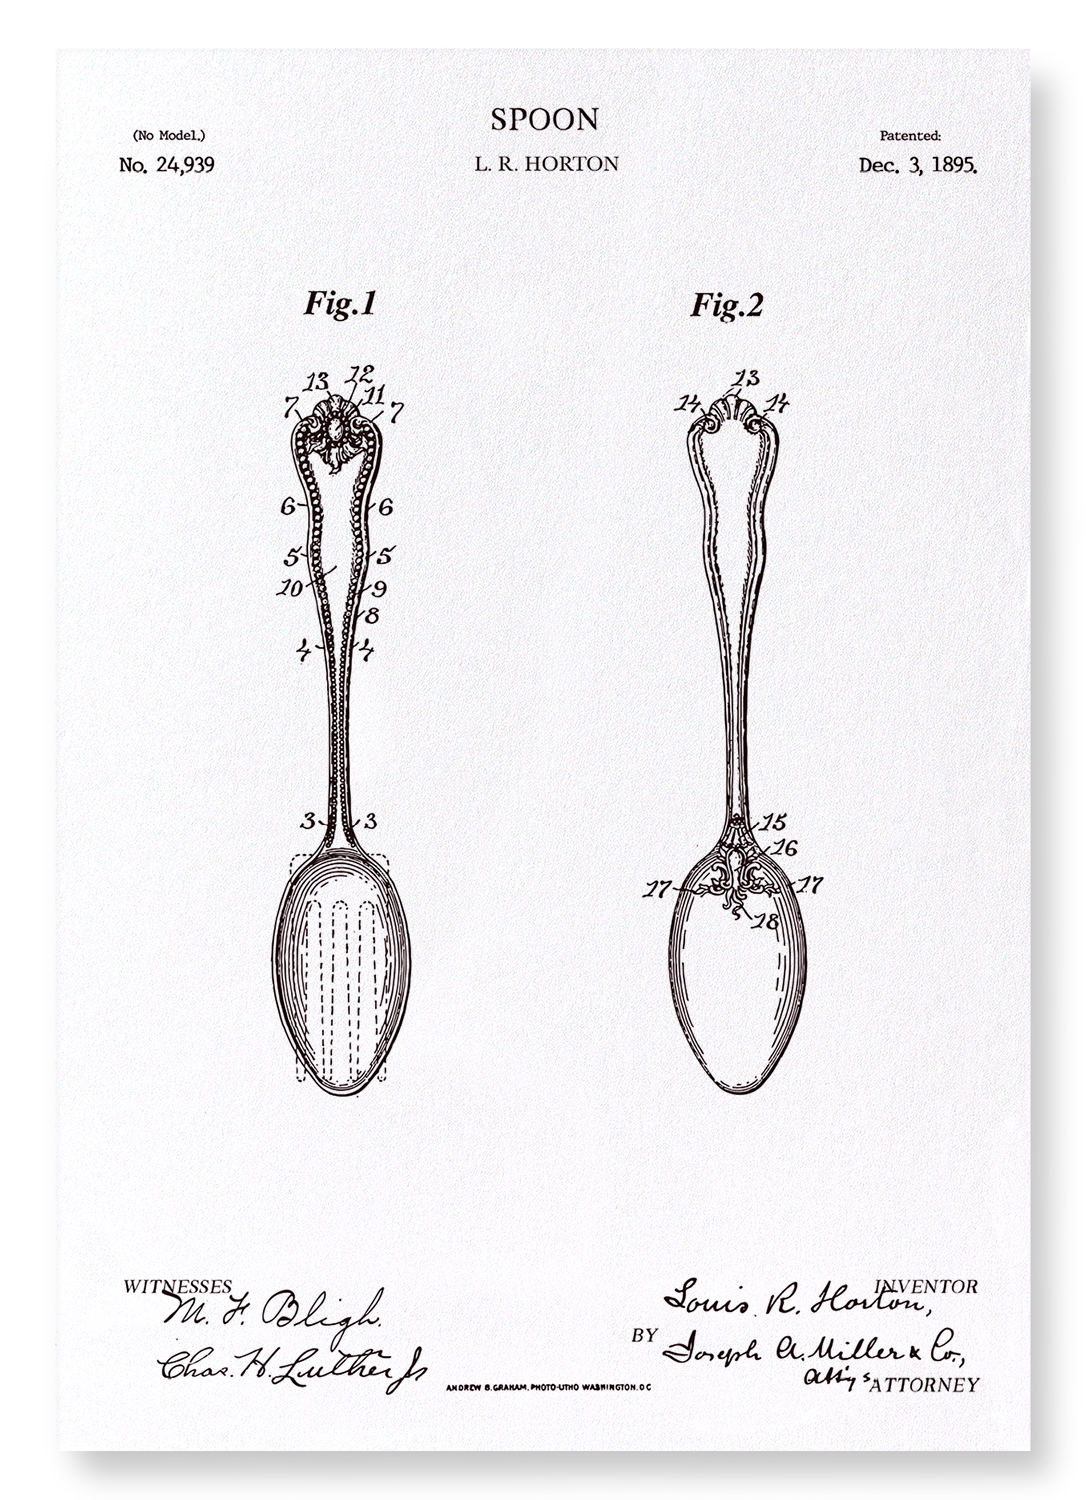 PATENT OF SPOON (1895)